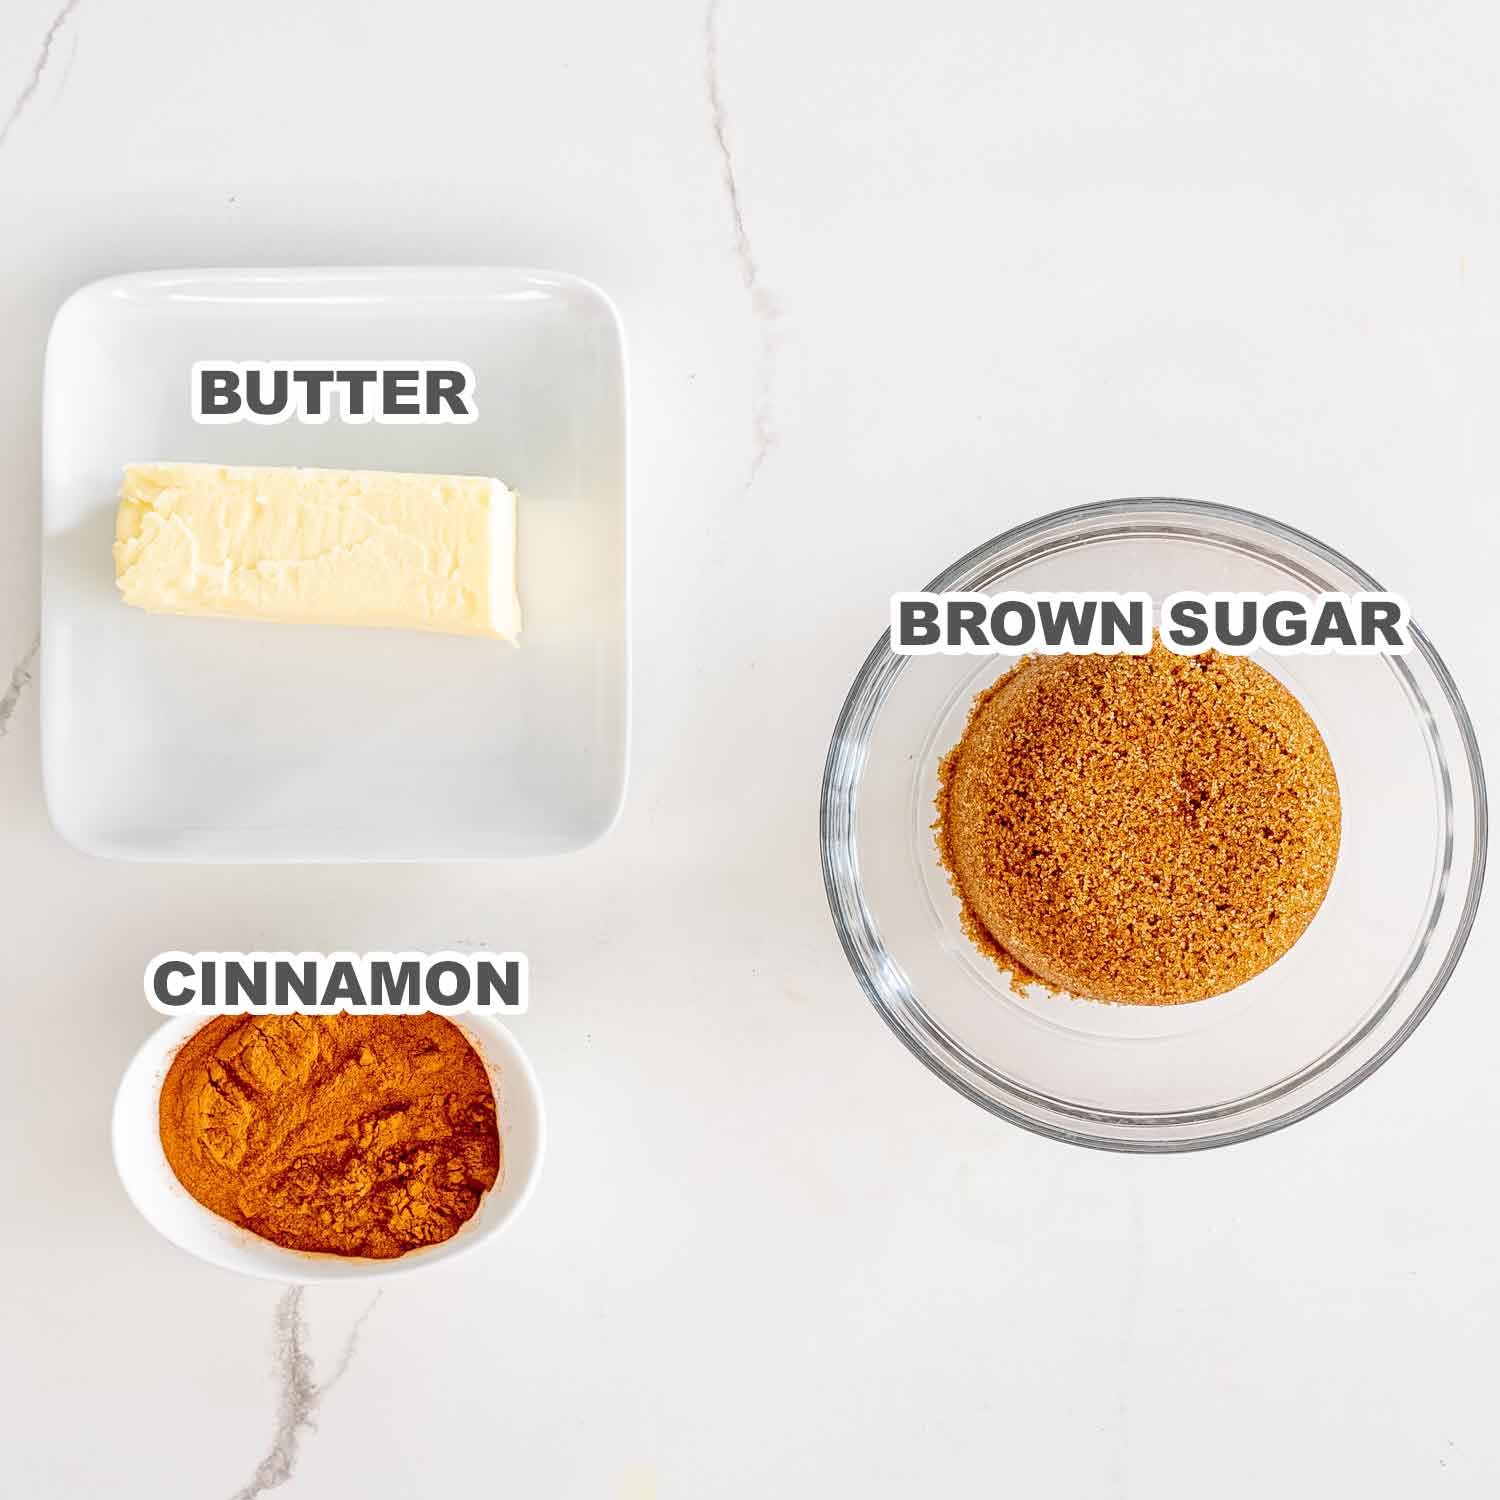 ingredients needed to make filling for cinnamon rolls.